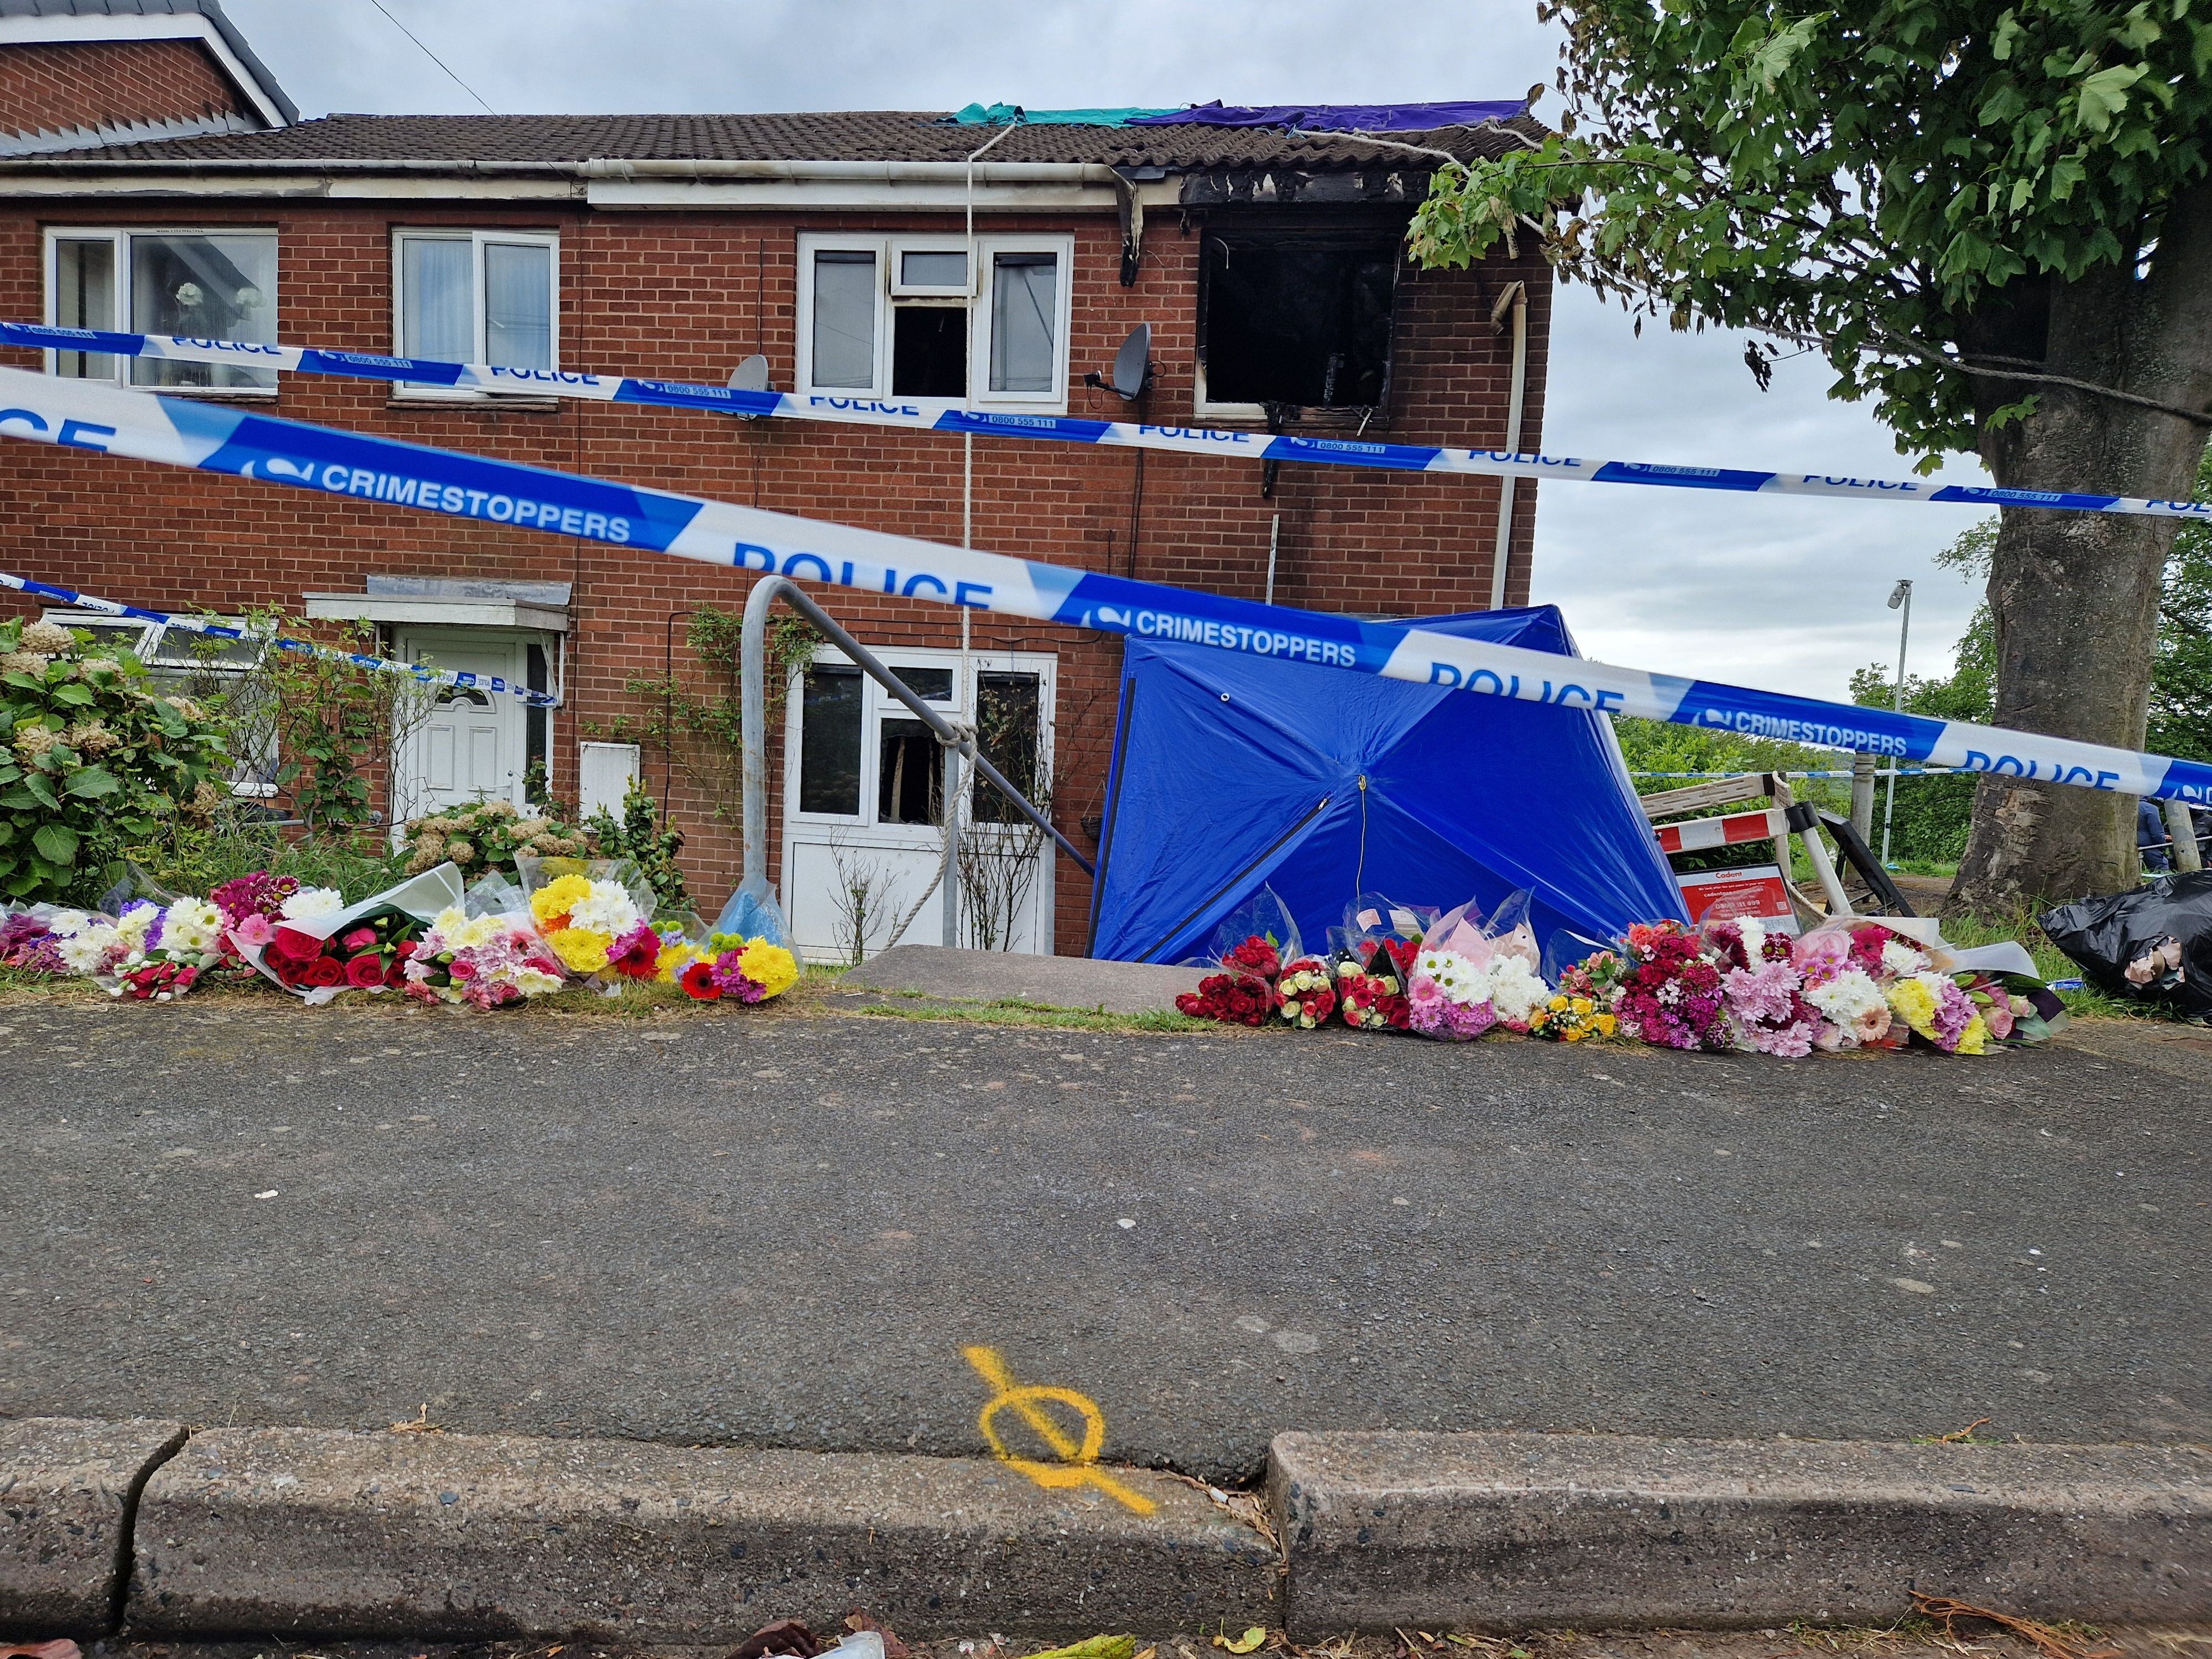 Sea of tributes left at Wolverhampton house after deadly fire prompts murder probe